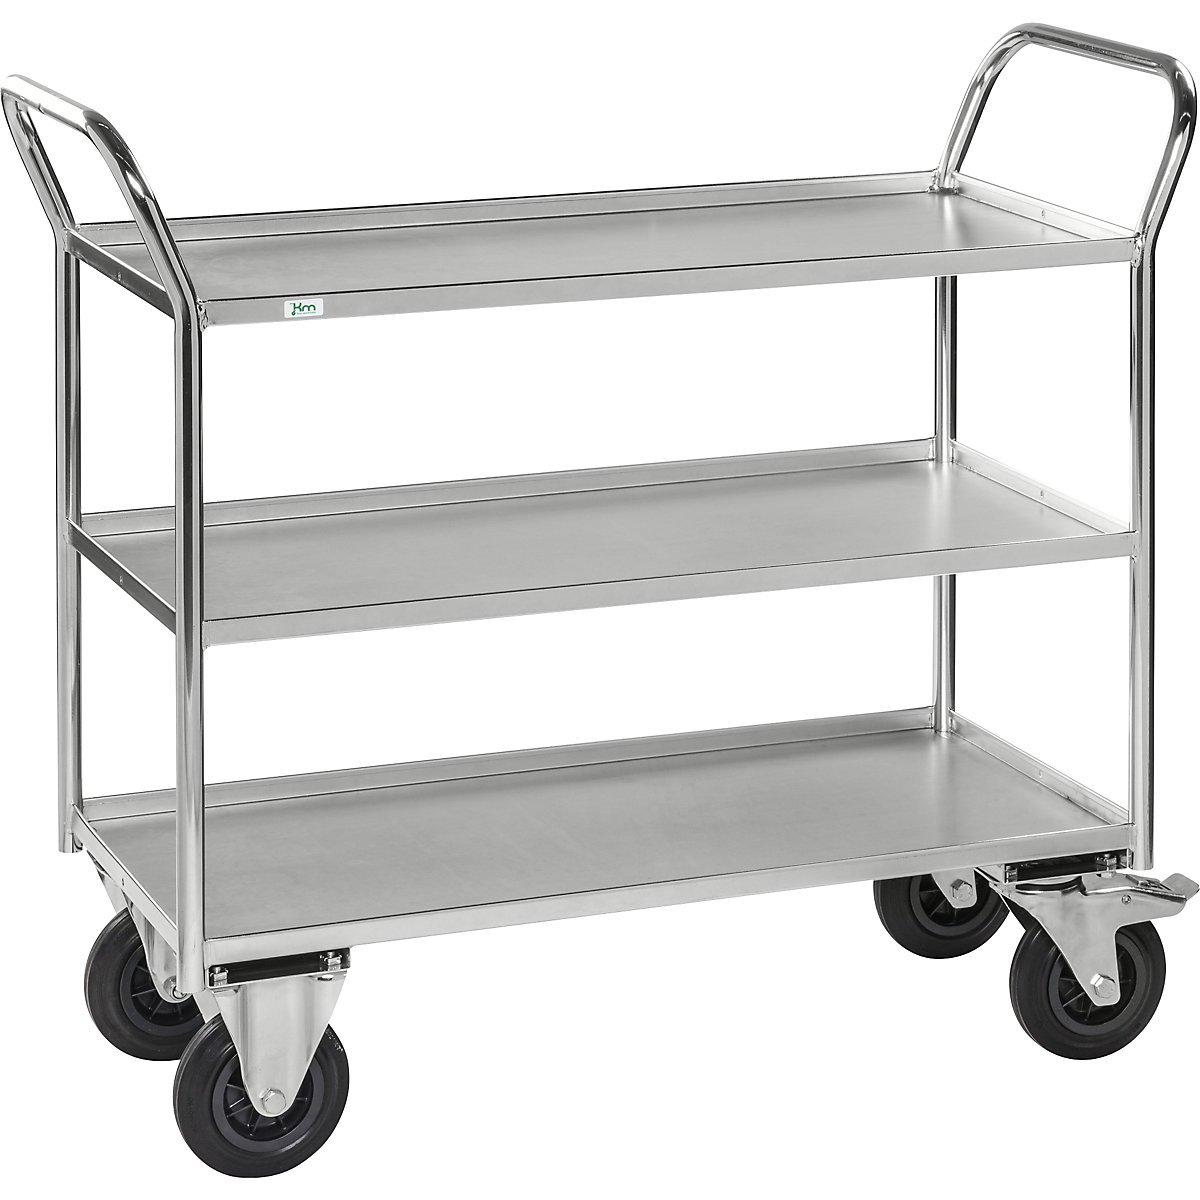 KM41 table trolley – Kongamek, 3 shelves with raised edges, LxWxH 1080 x 450 x 1000 mm, zinc plated, 2 swivel castors with stops, 2 fixed castors, 5+ items-6